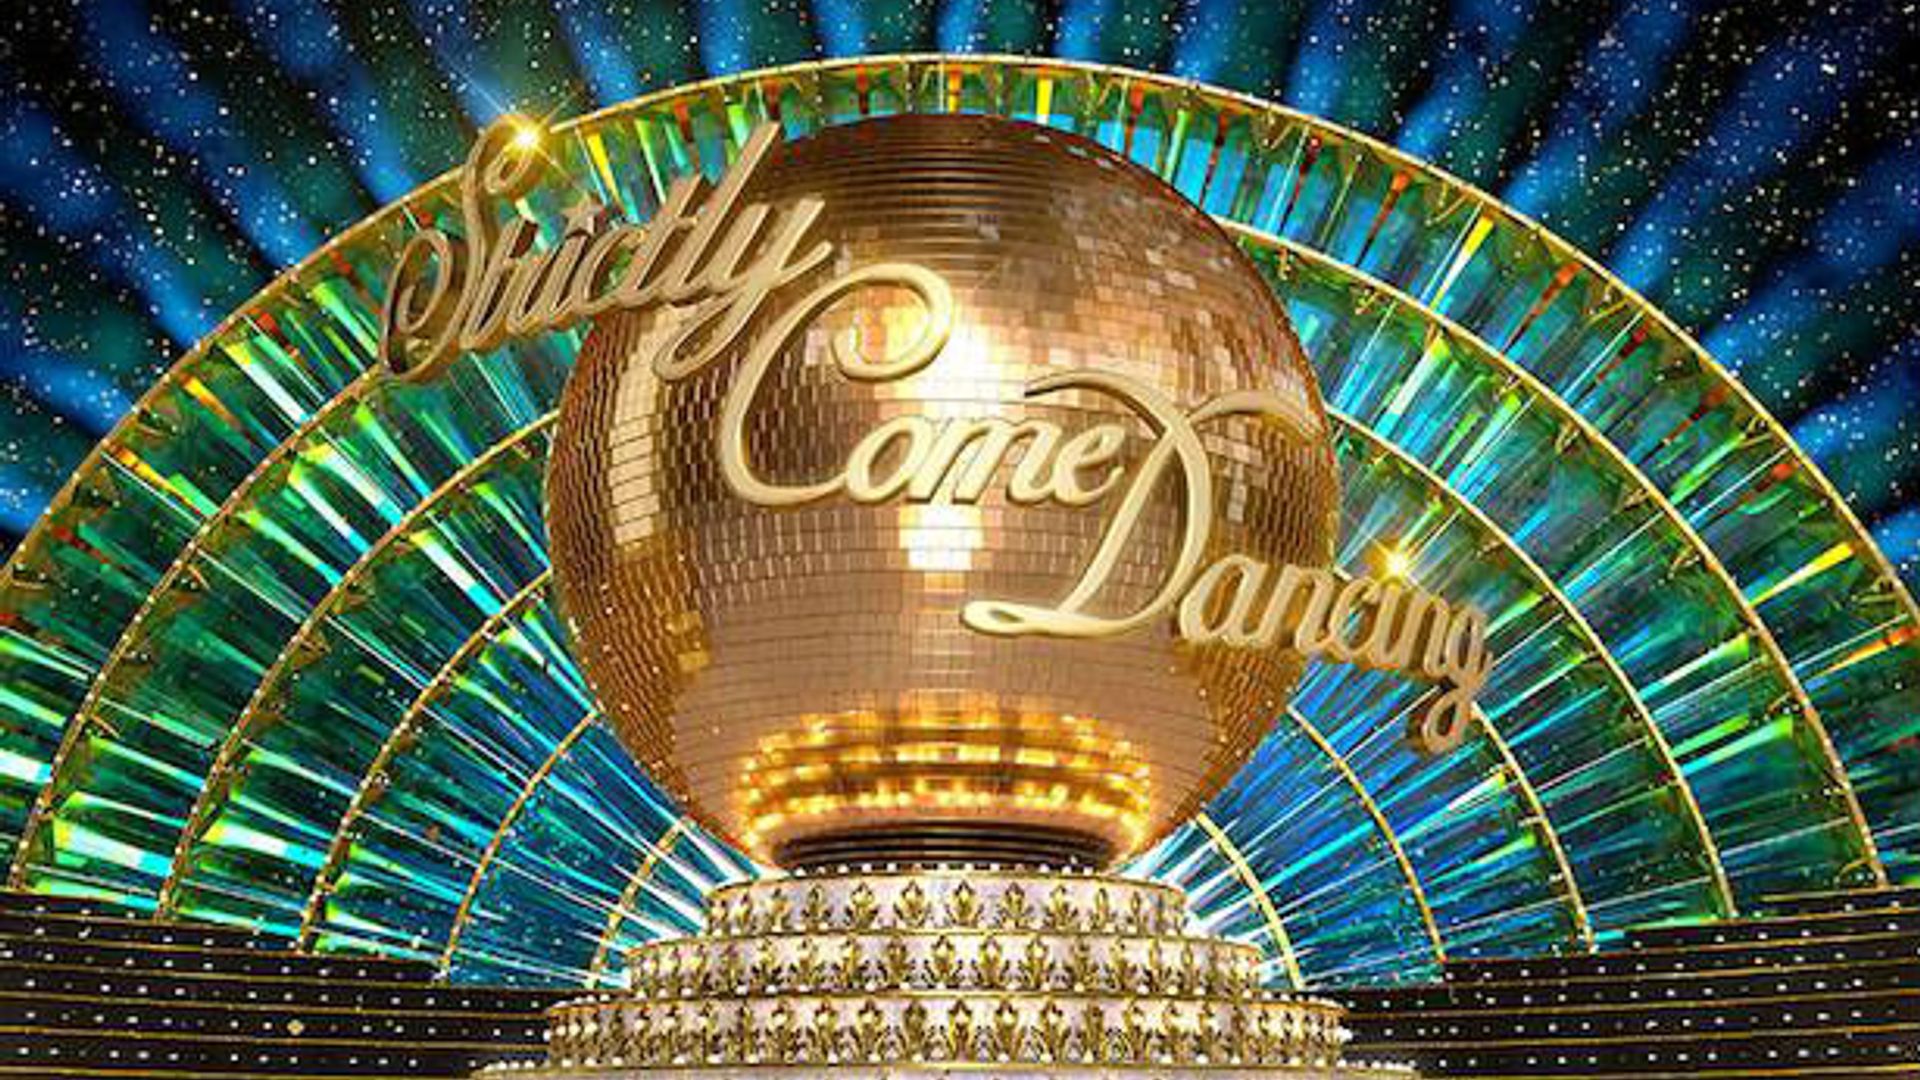 strictly come dancing welcomes back stars